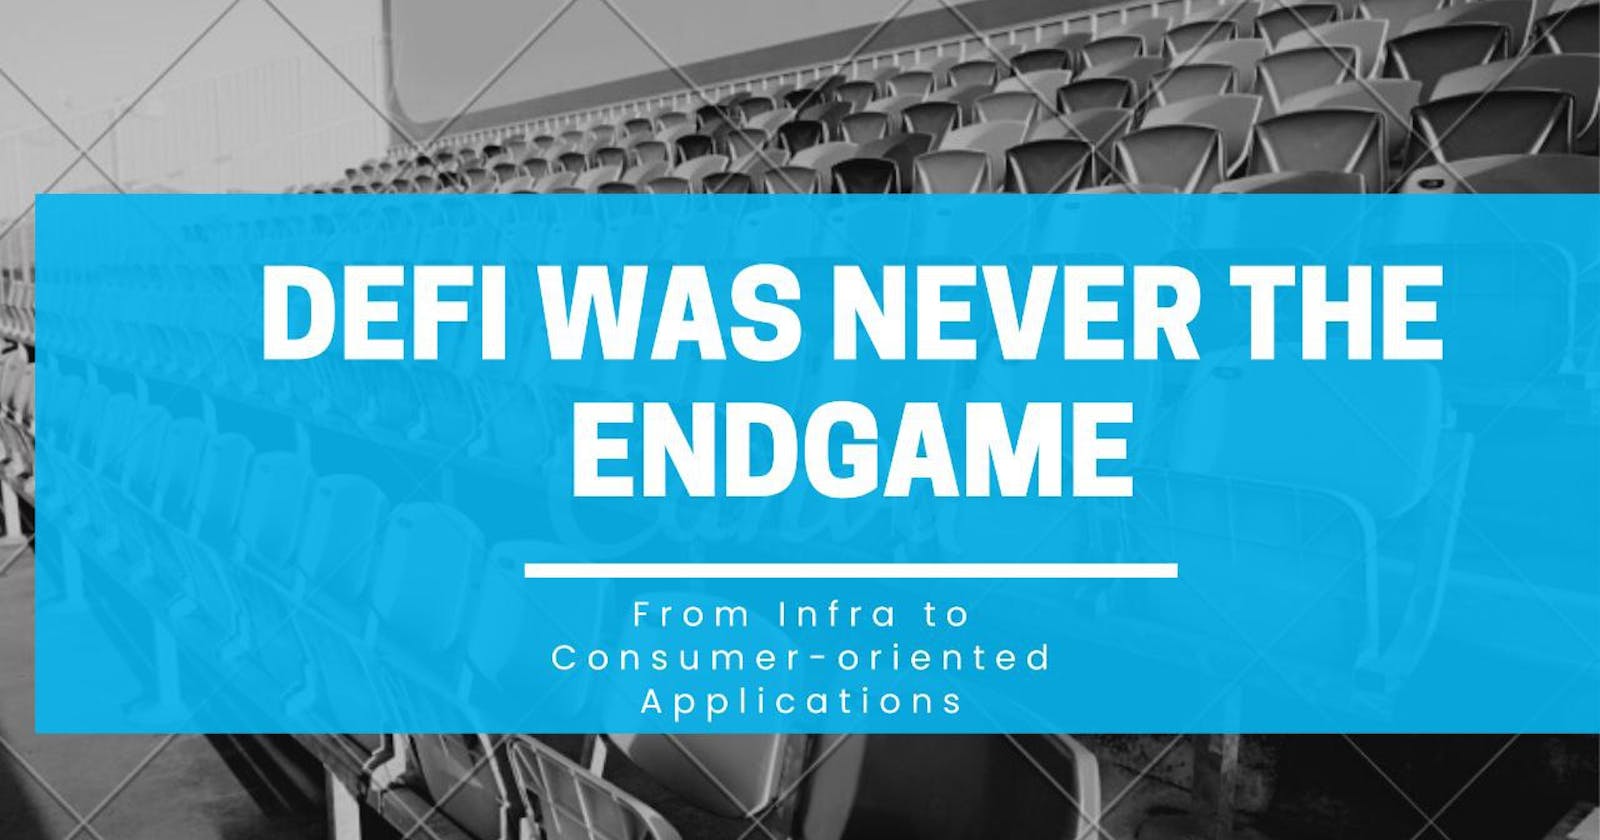 DeFi Was Never The Endgame